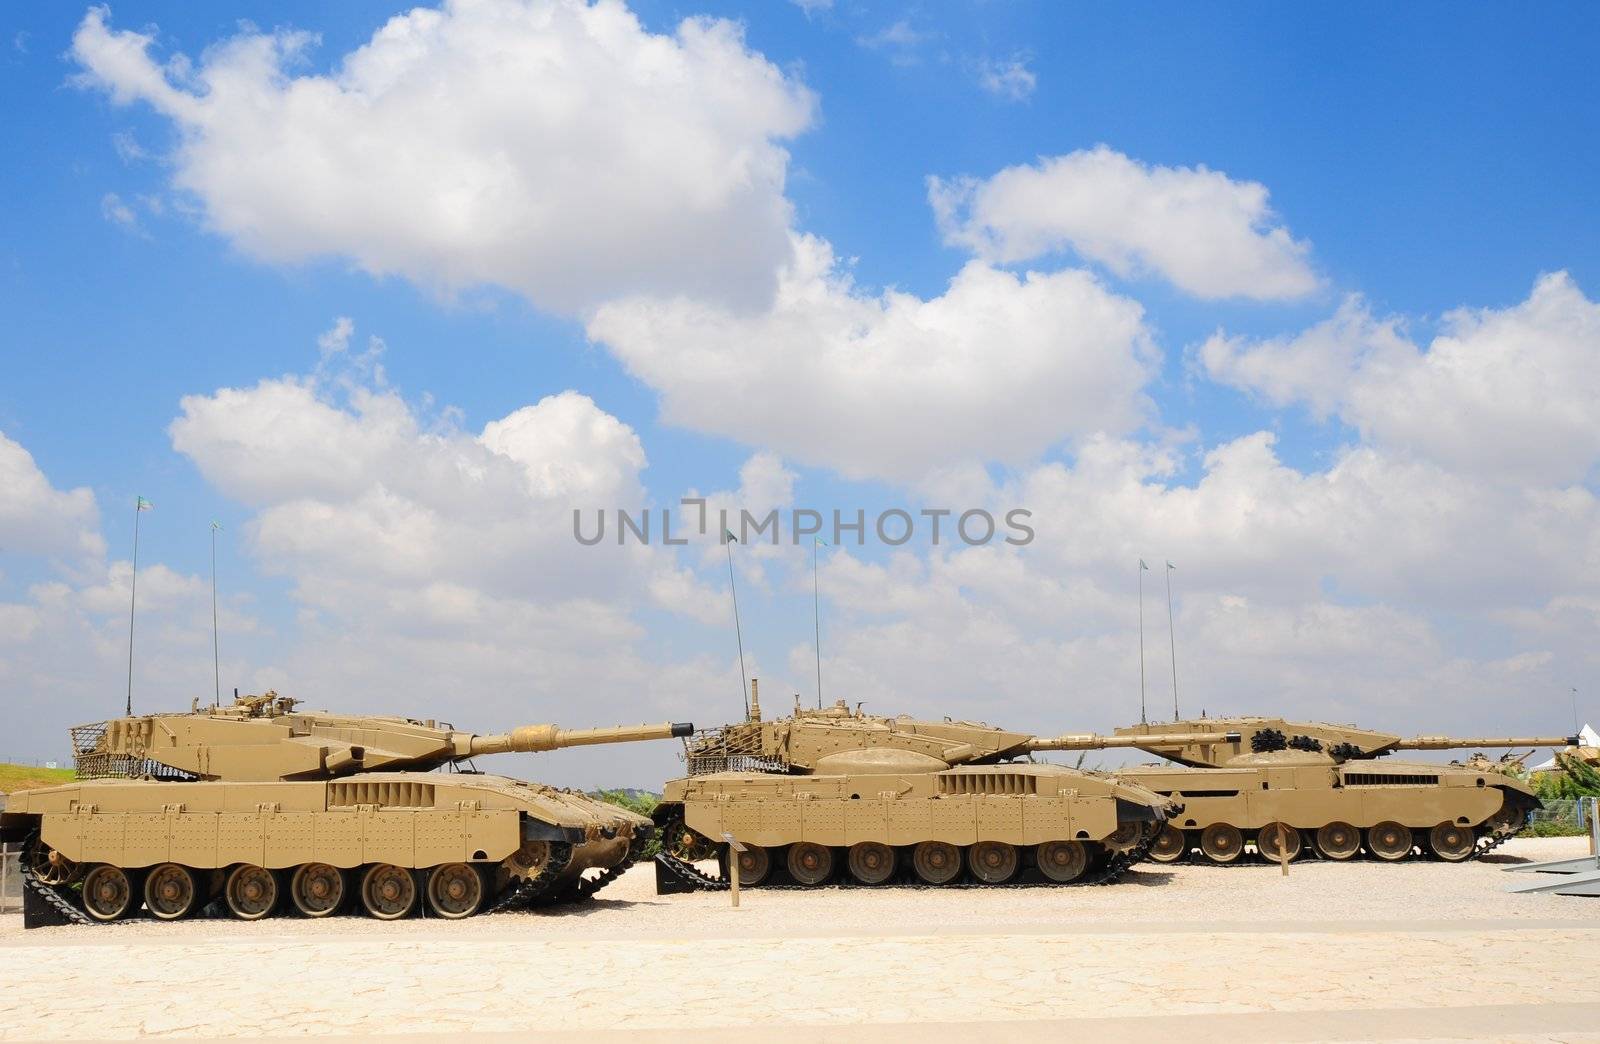 Armored Corps Museum by gkuna